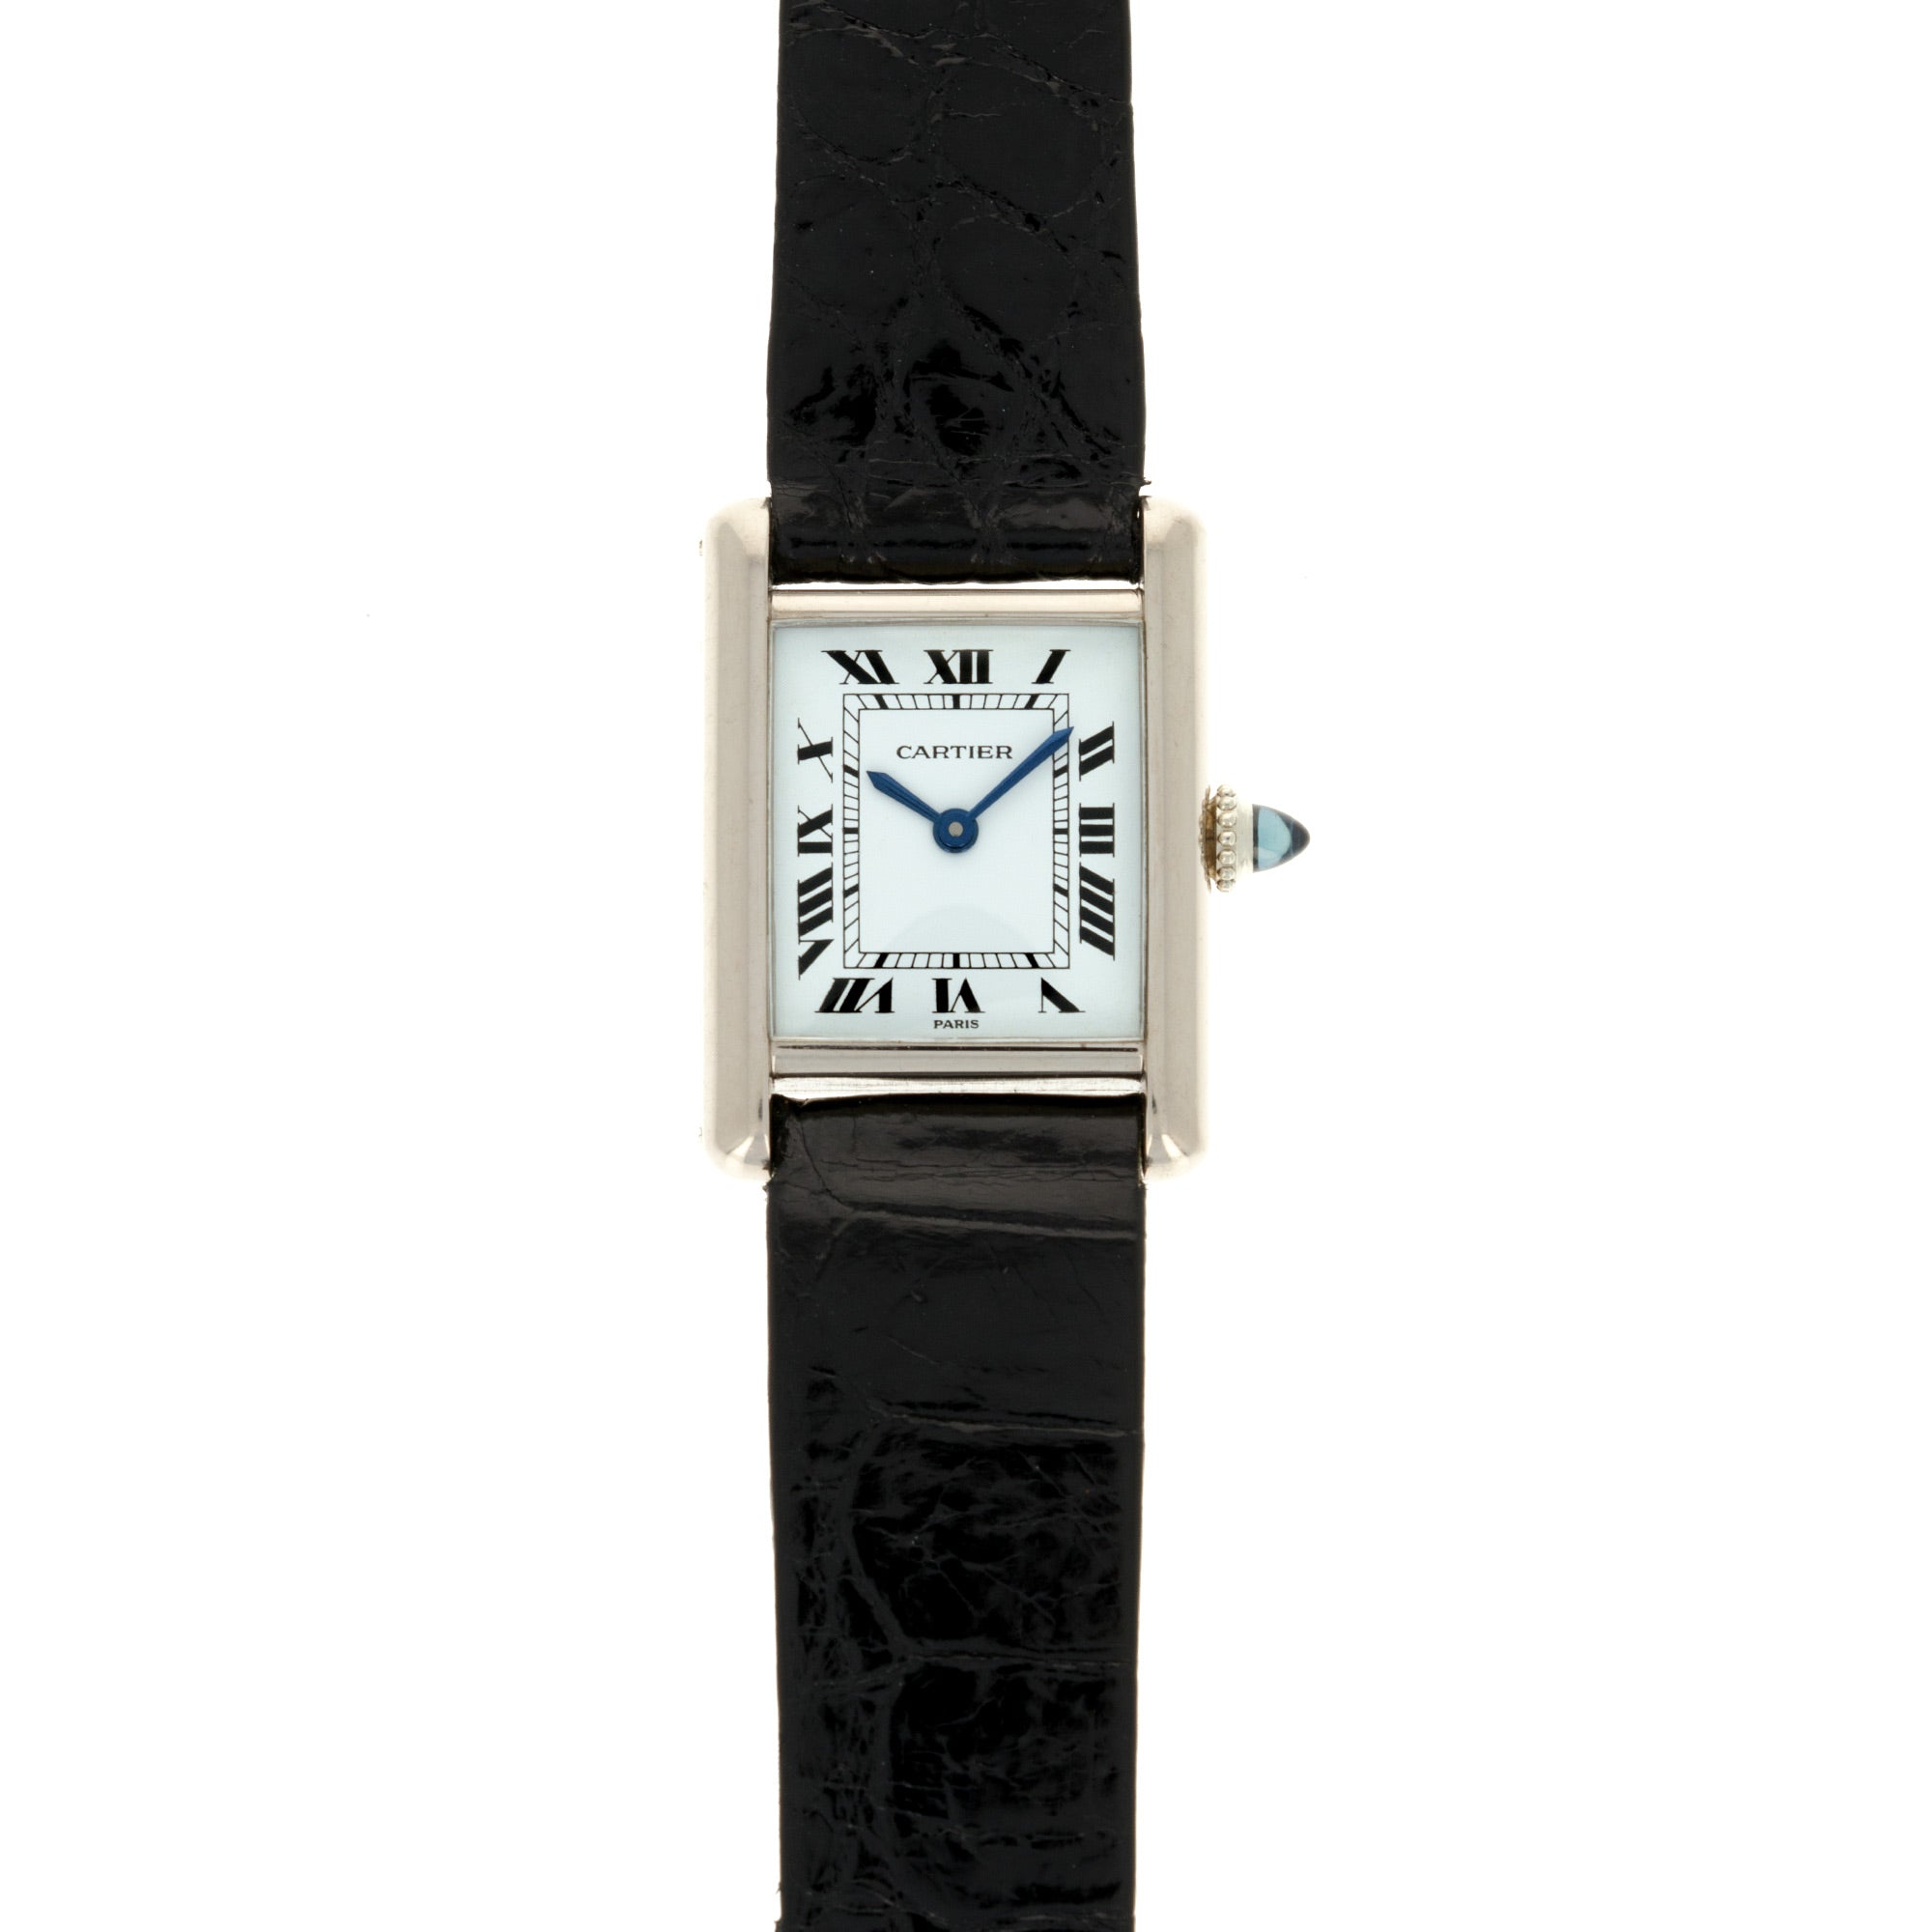 Cartier - Cartier White Gold Tank Louis - The Keystone Watches